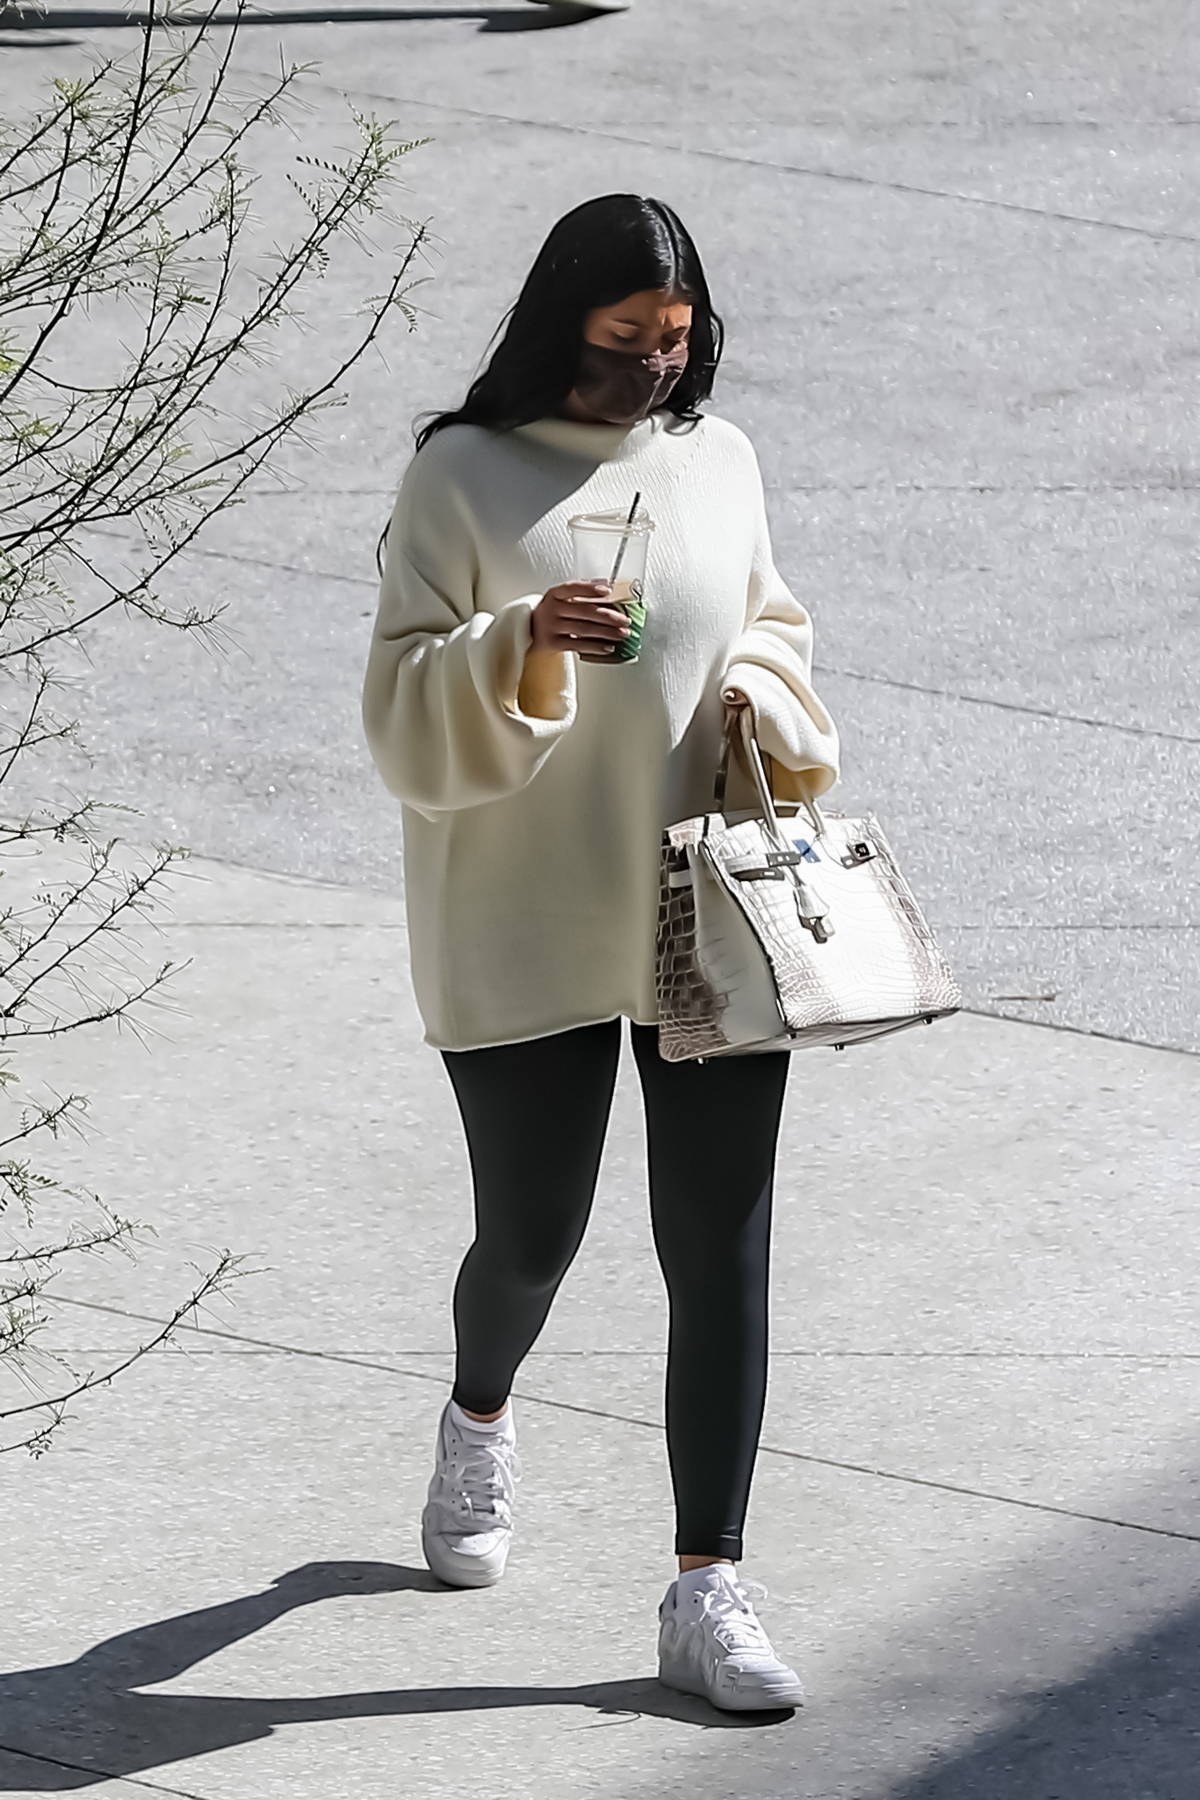 kylie jenner keeps it cozy in an oversized sweater and leggings while out  running errands in los angeles-070322_7